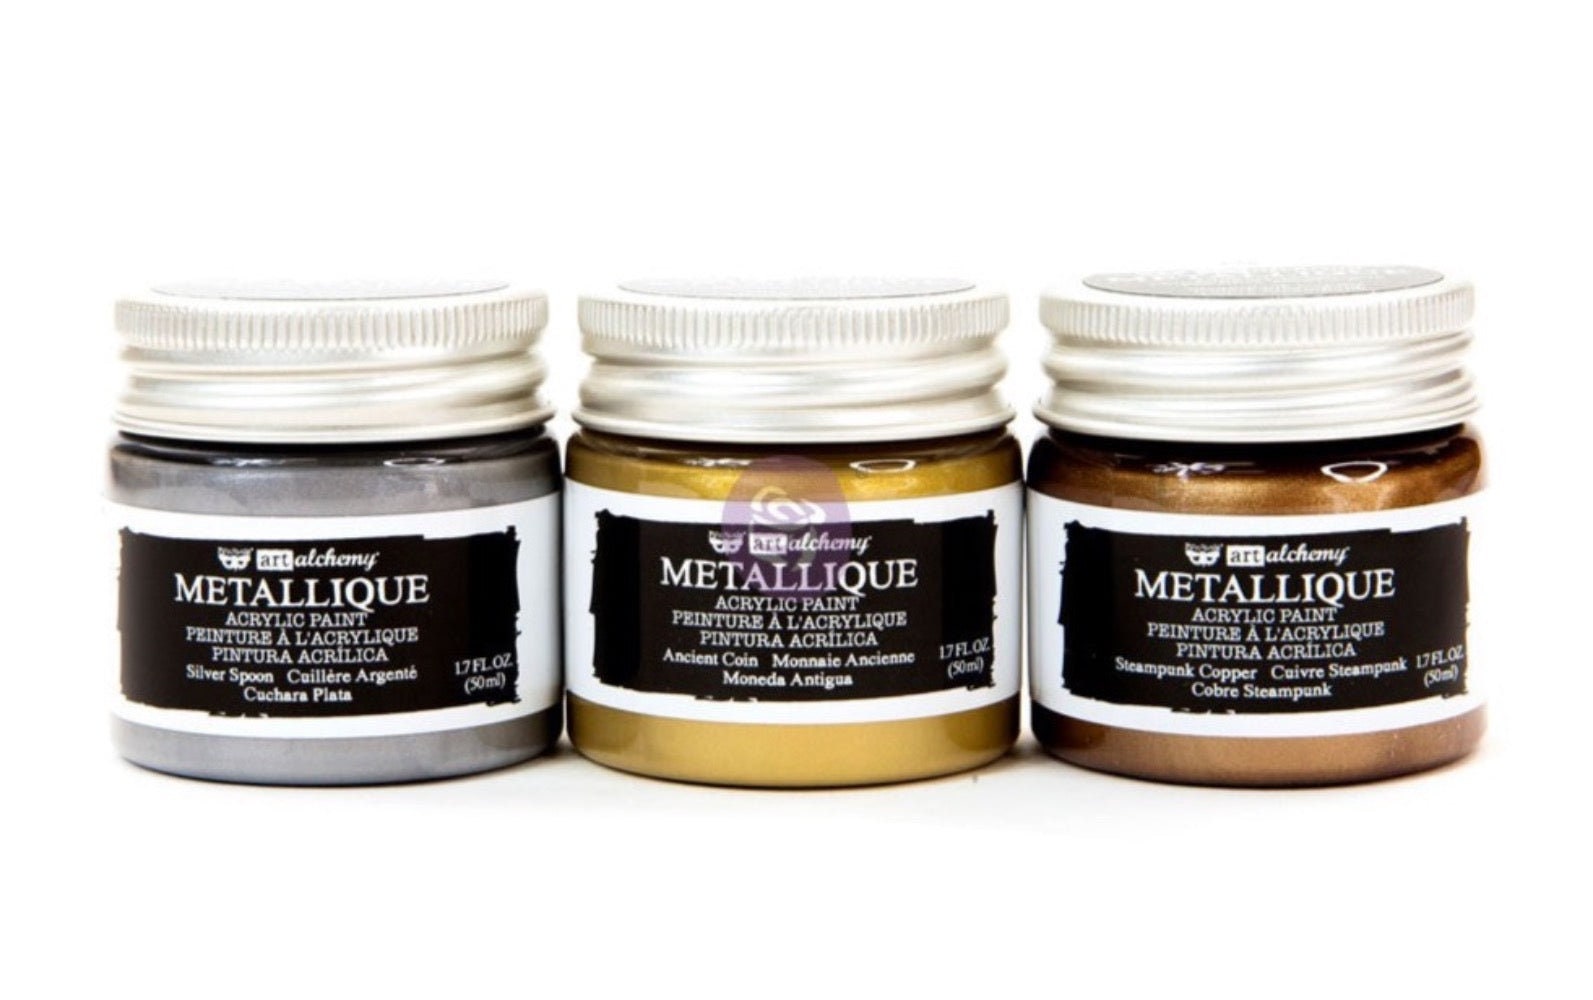 Folkart Metallic Acrylic Paint in Assorted Golden Colors Such as